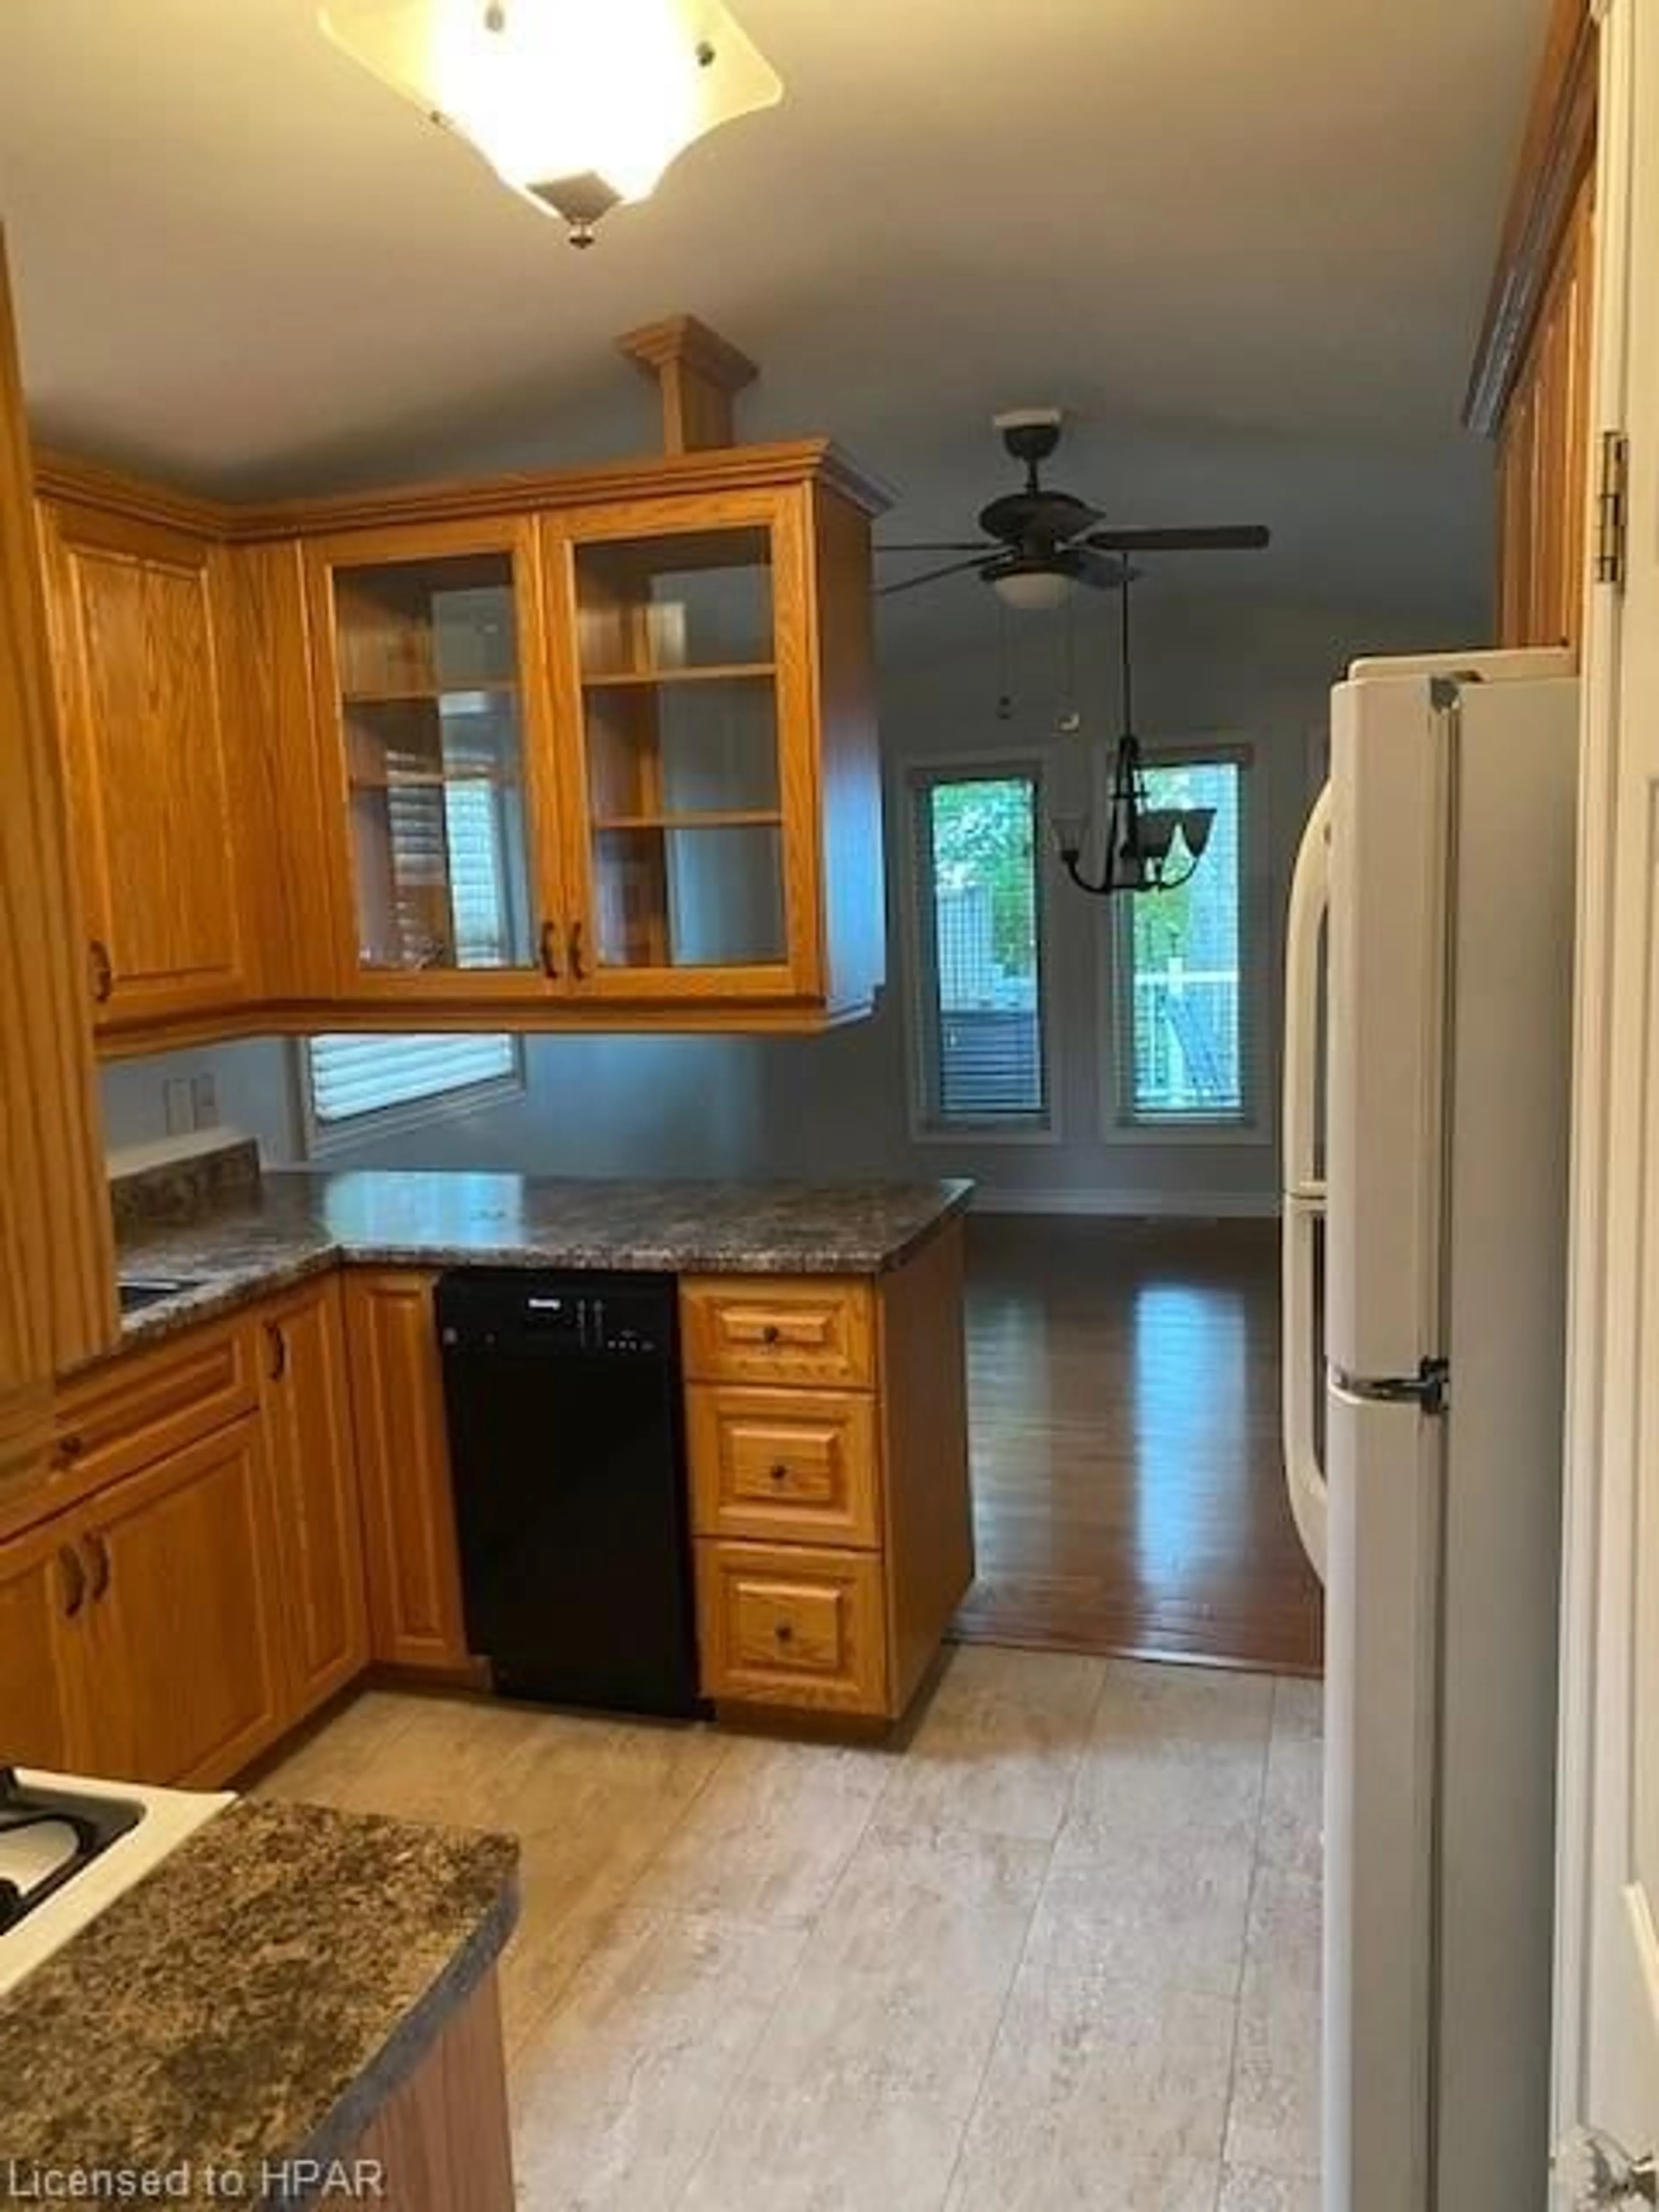 Kitchen for 77307 Bluewater Hwy, Central Huron Ontario N0M 1G0